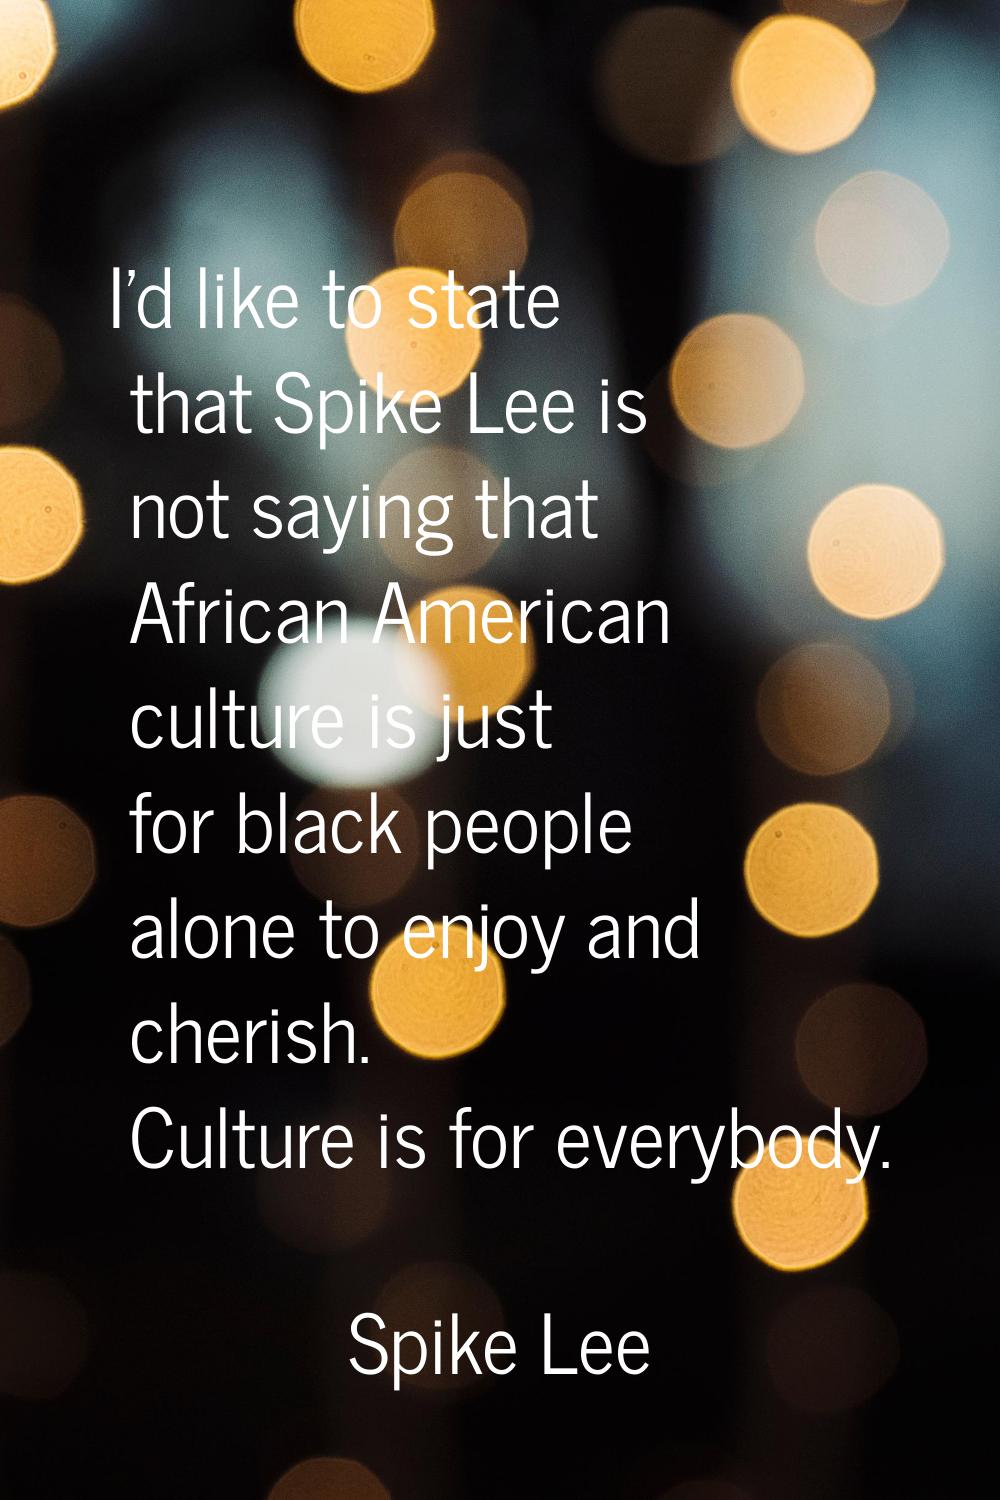 I'd like to state that Spike Lee is not saying that African American culture is just for black peop